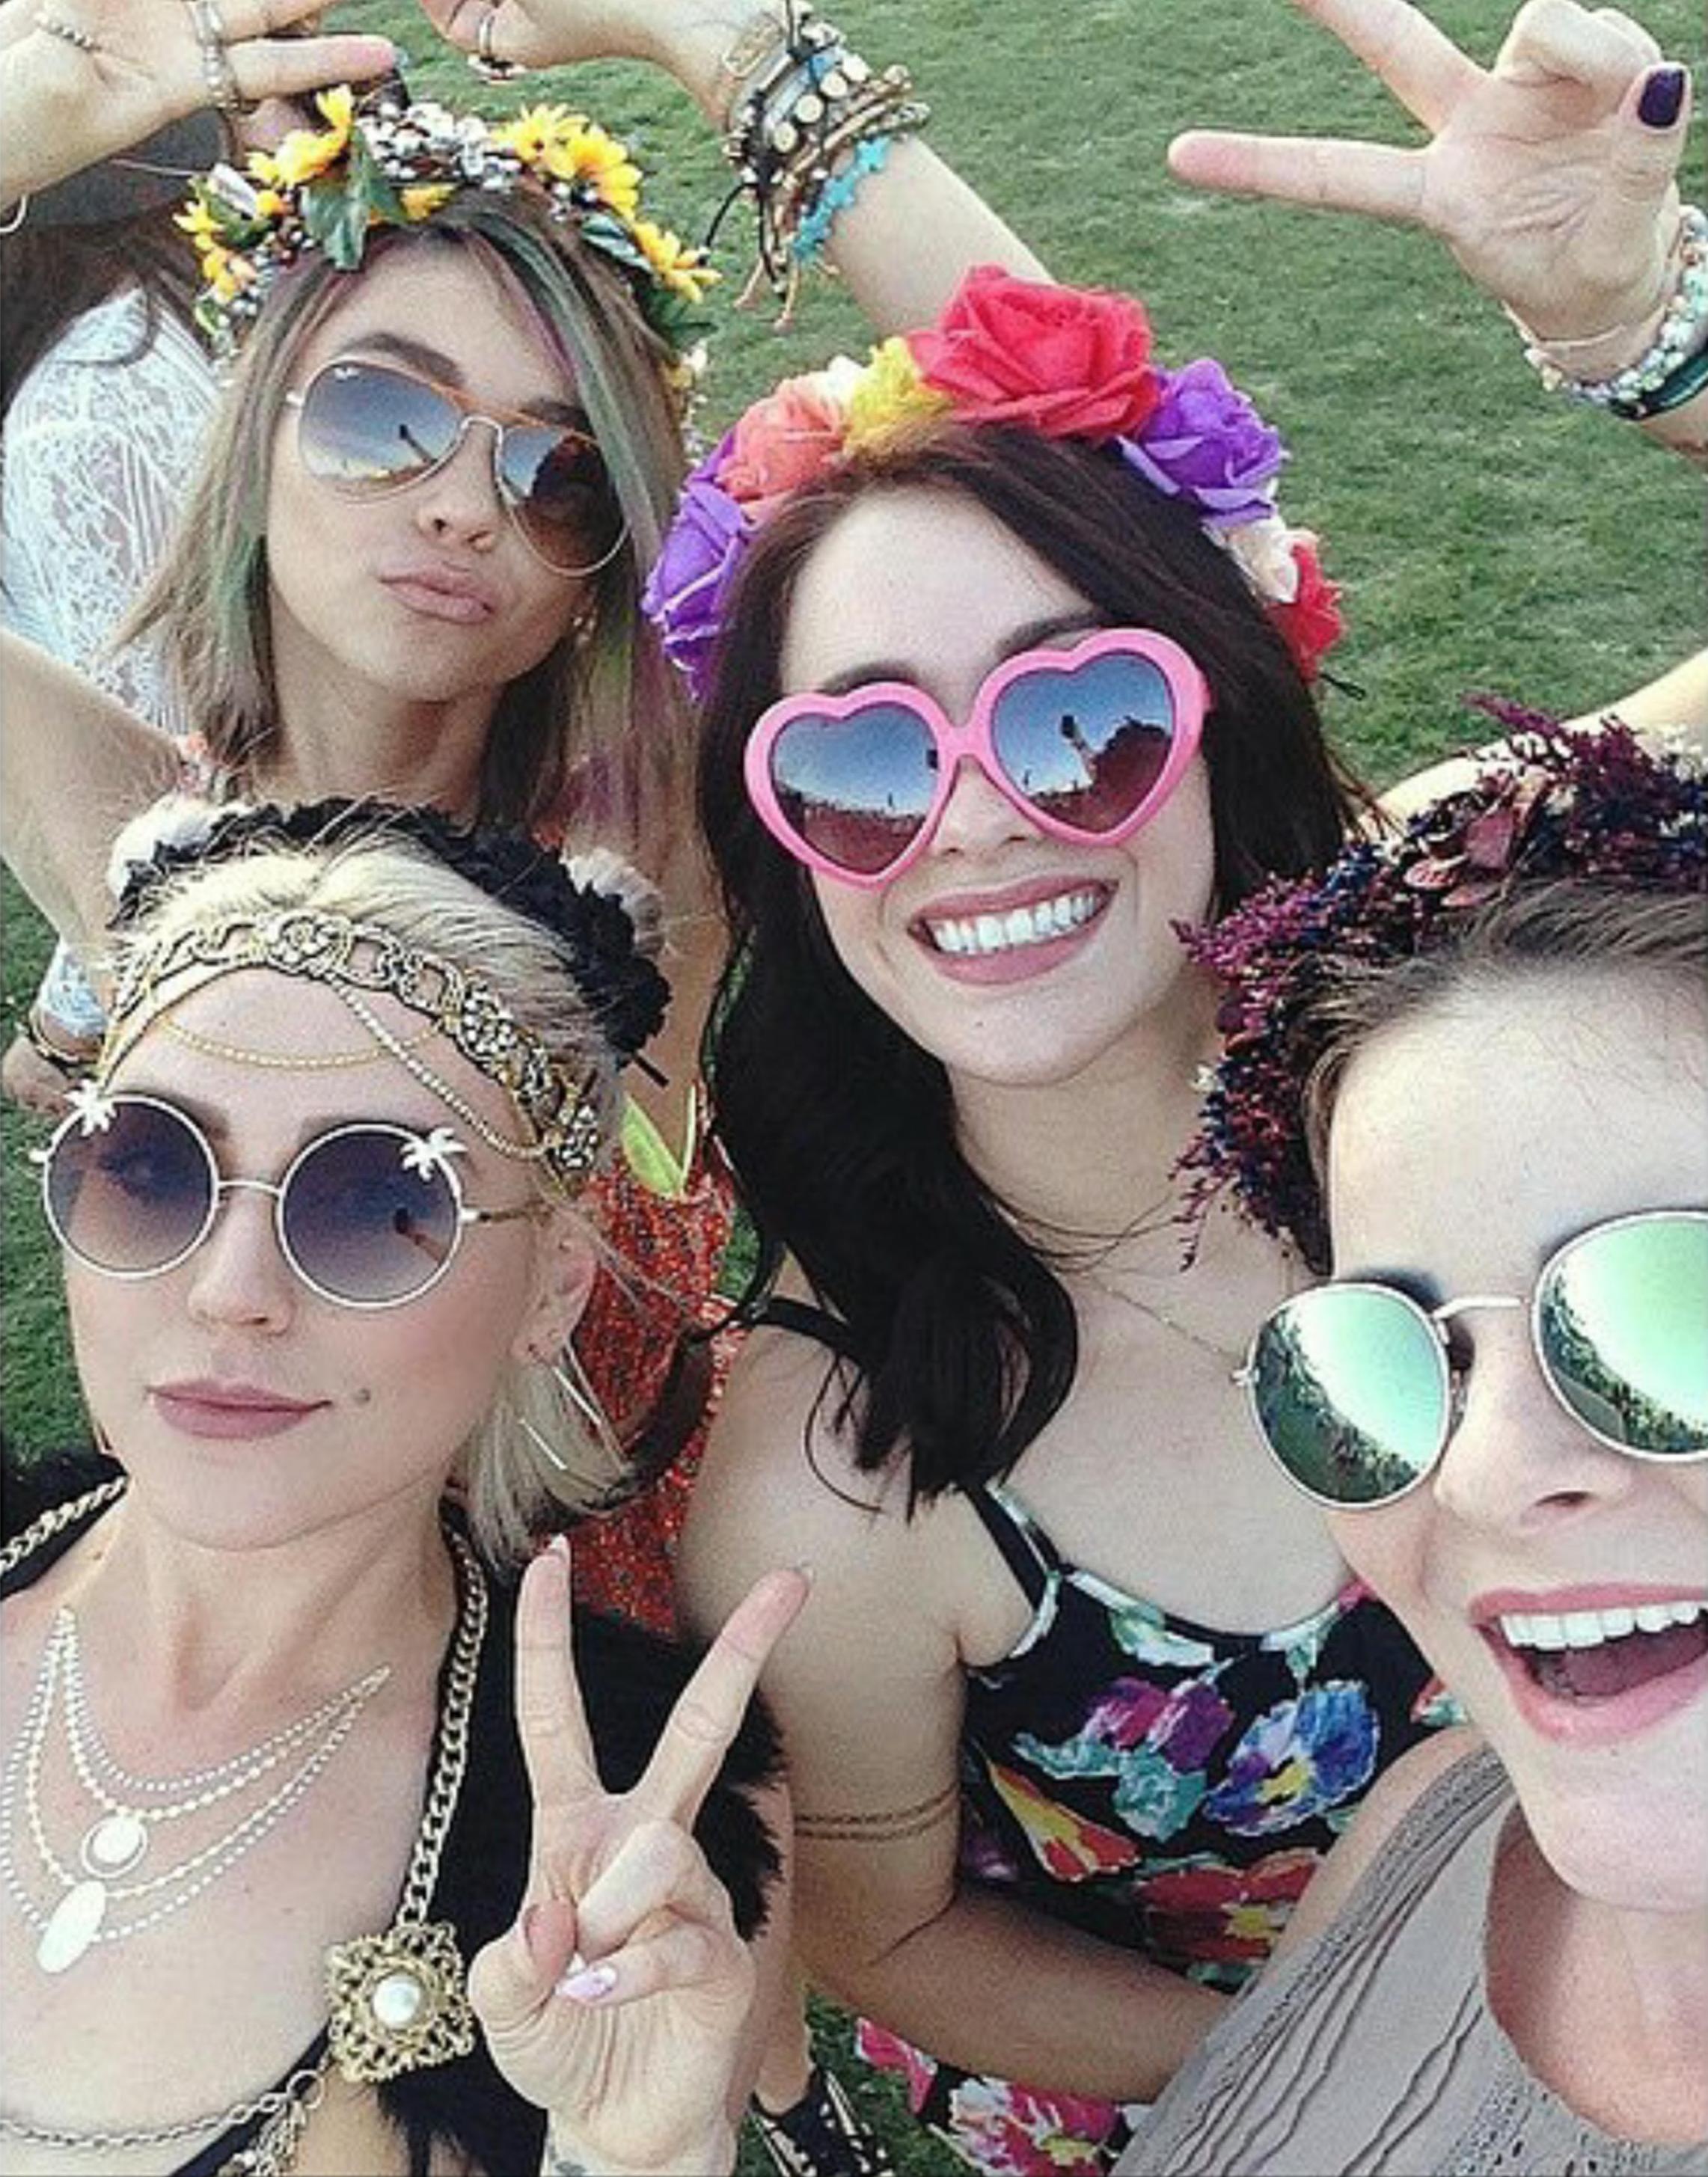 Actress Sarah Hyland wearing Coachella headband designed by Betty Long (What A Betty). Betty Long, owner and designer for What A Betty. Designer of couture headpieces for celebrities, red carpet, runway, and bridal. www.whatabetty.com